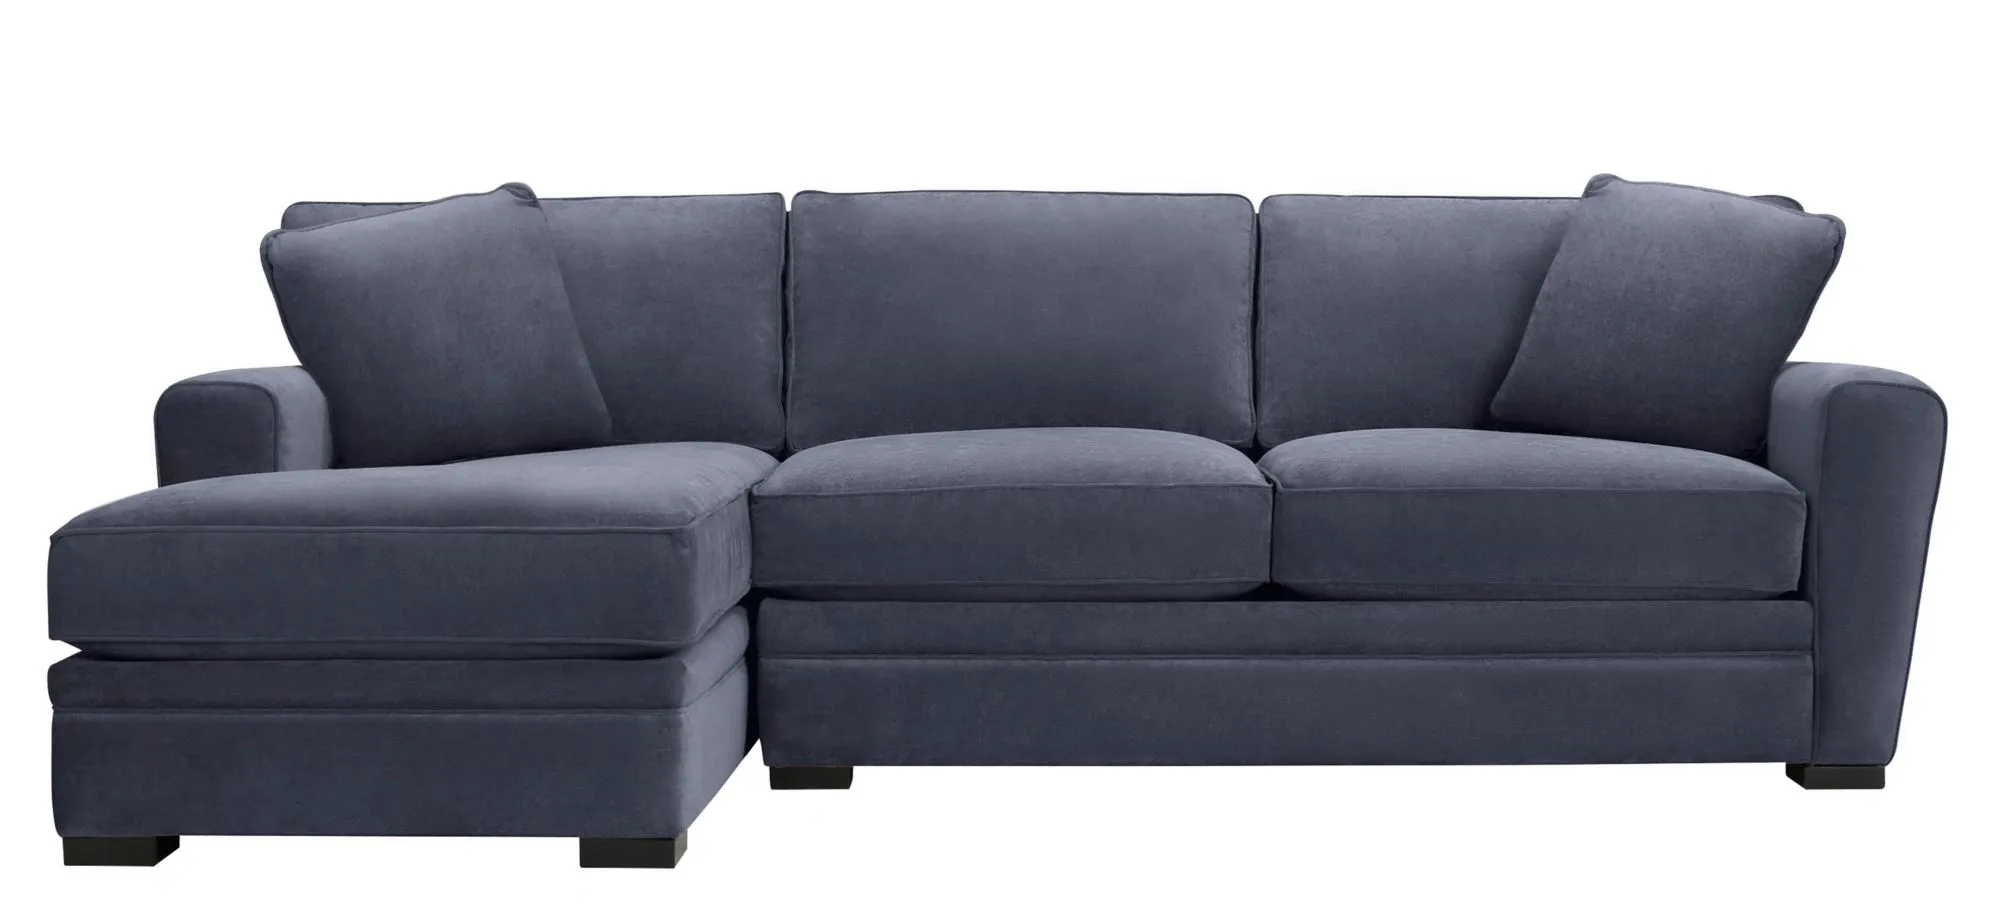 Artemis II 2-pc. Left Hand Facing Sectional Sofa in Gypsy Slate by Jonathan Louis